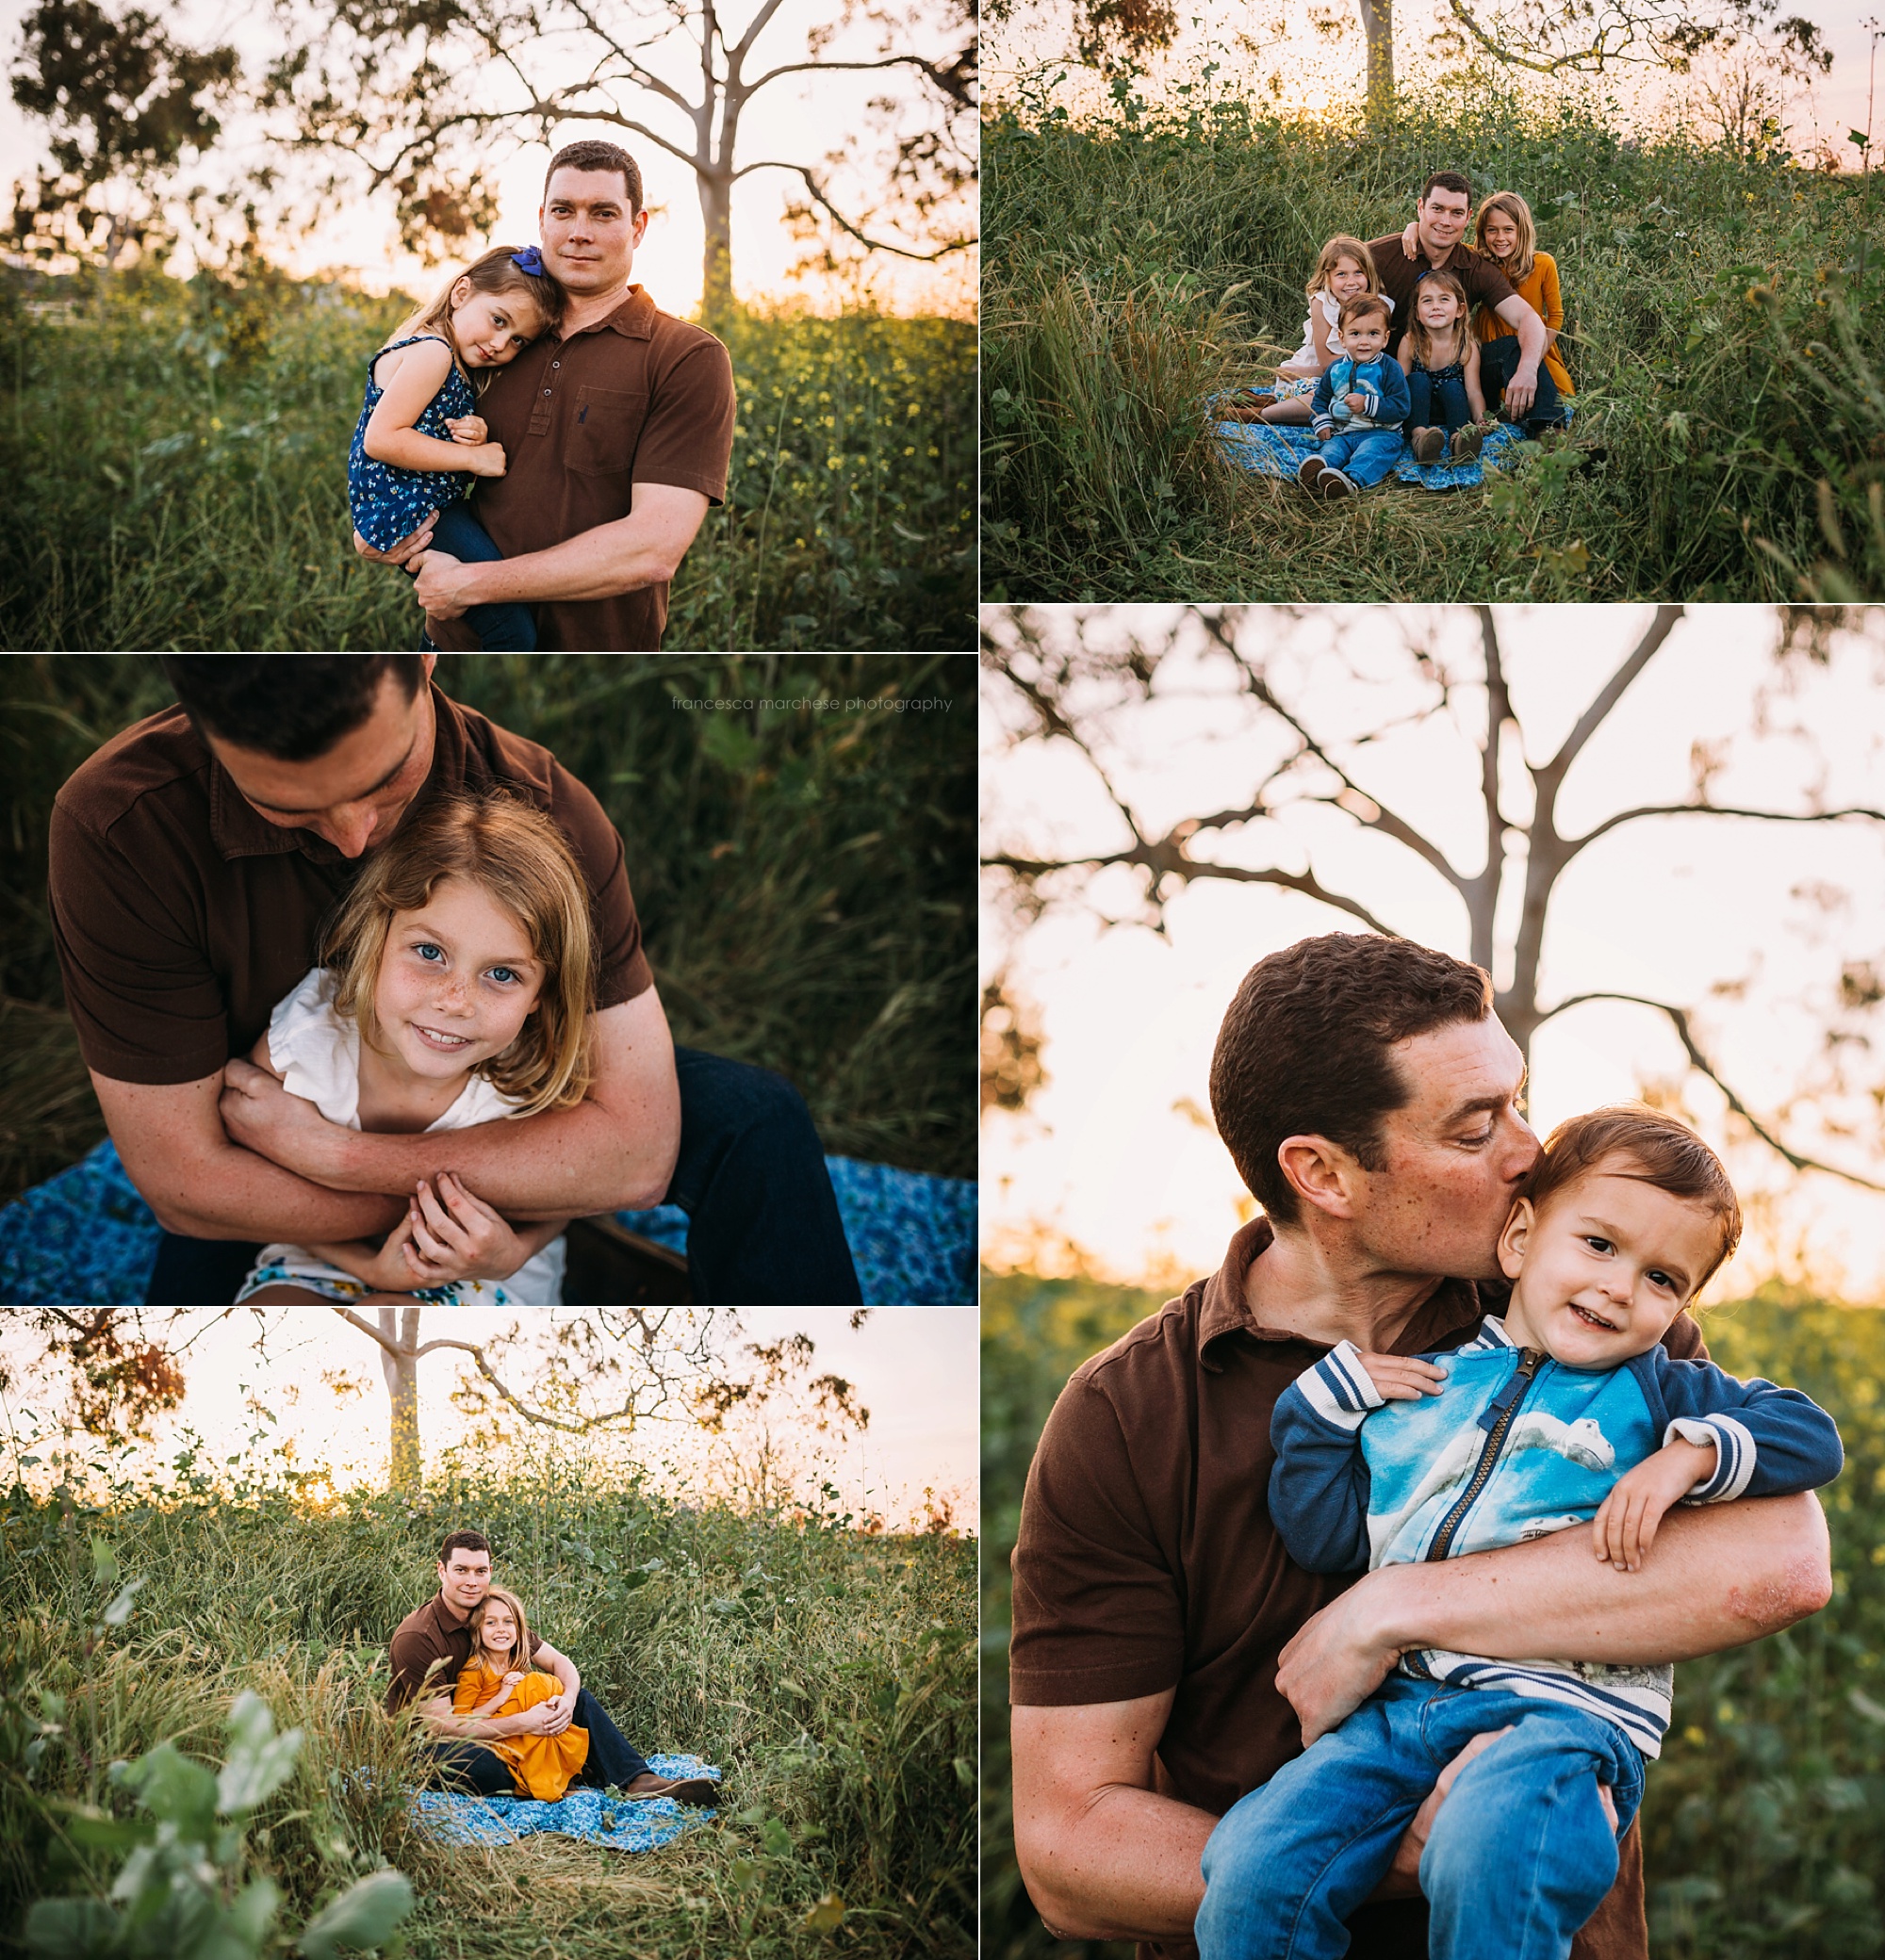 Spring flower field photography session family of 6 - Francesca Marchese Photography